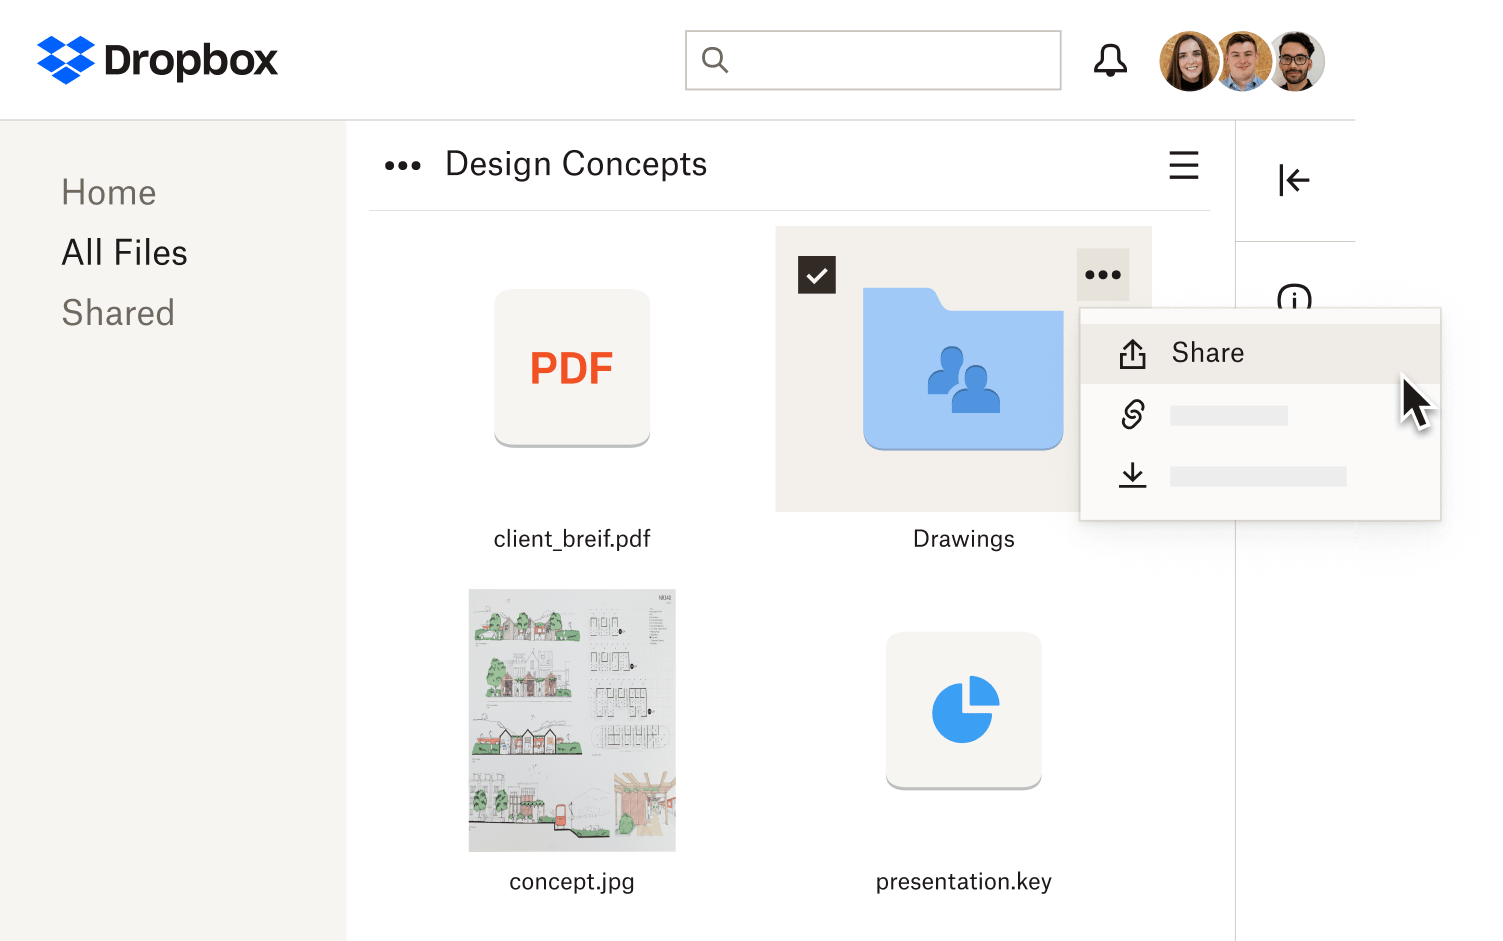 Someone shares a link to a Drawings folder in the Dropbox interface